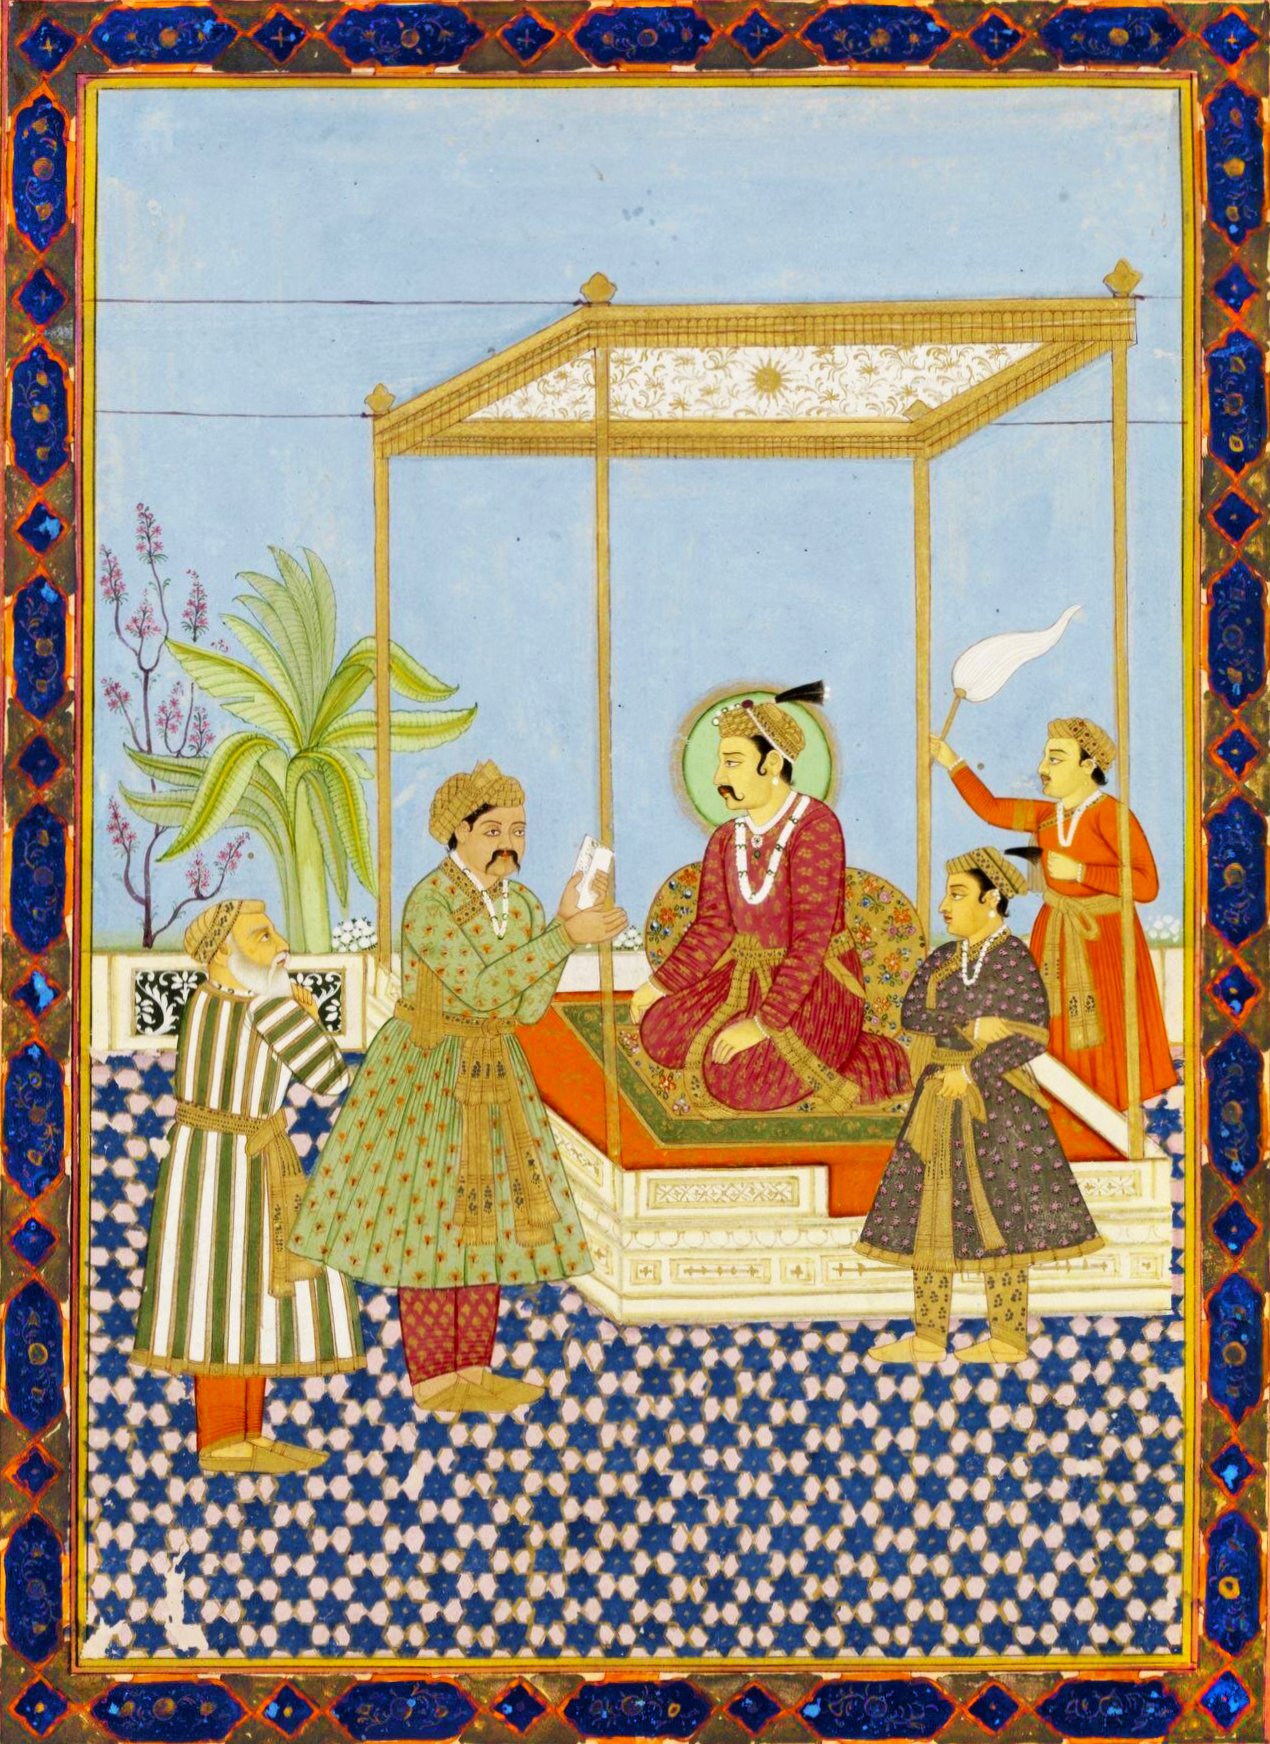 Opaque watercolor and gold painting on paper showcasing Emperor Akbar seated regally on a throne under a canopy, surrounded by attendants.